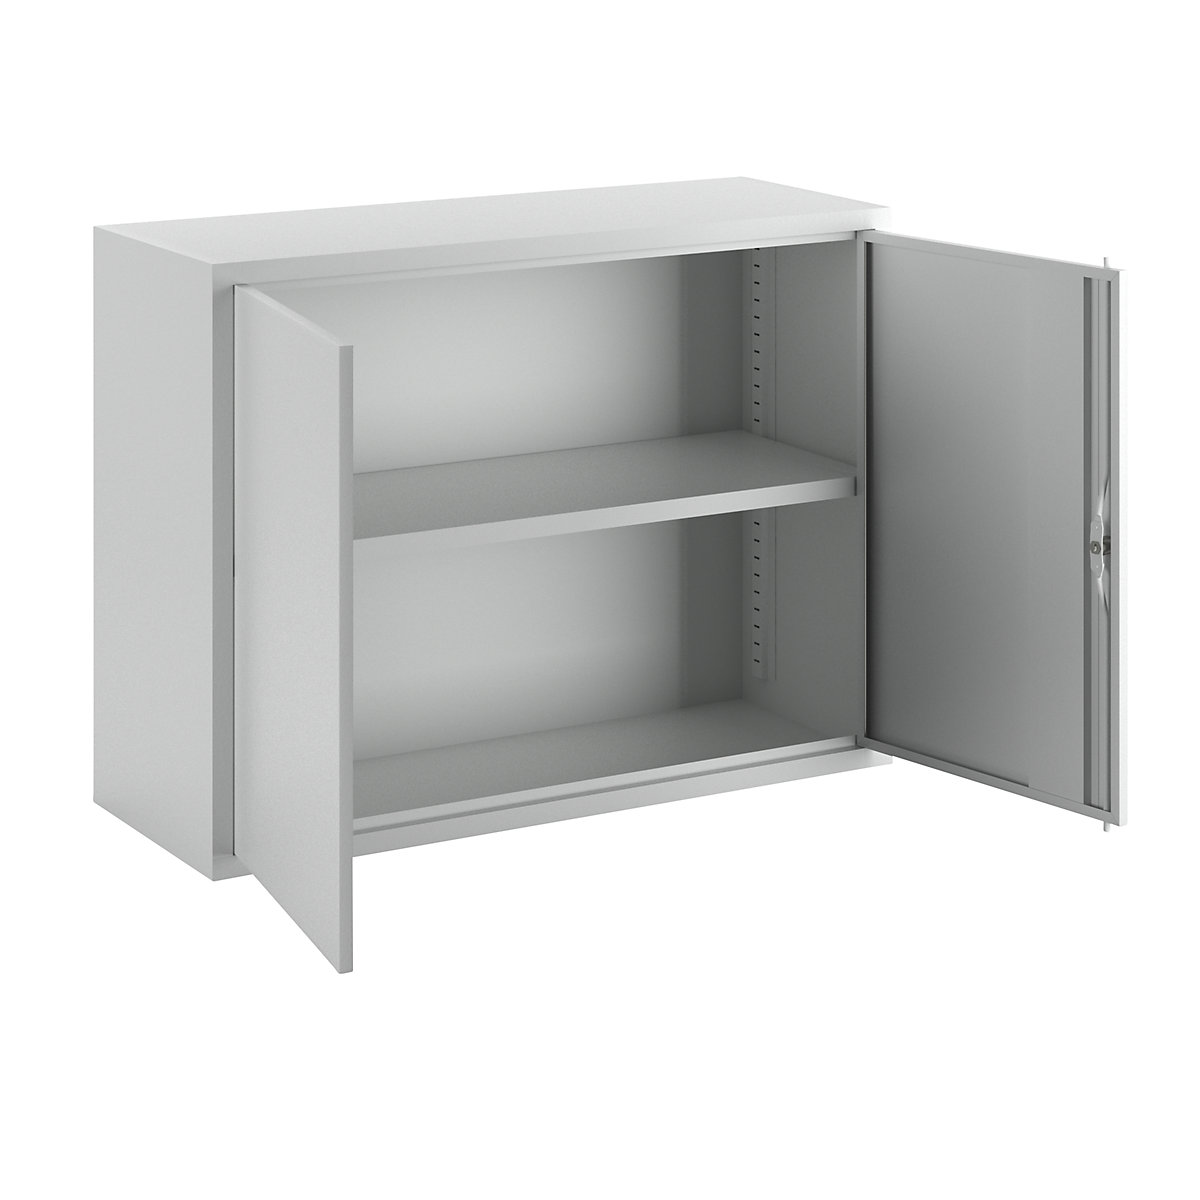 Wall mounted cupboard, height 600 mm – Pavoy, with solid panel door/s, width 800 mm, solid rear panel, grey-4